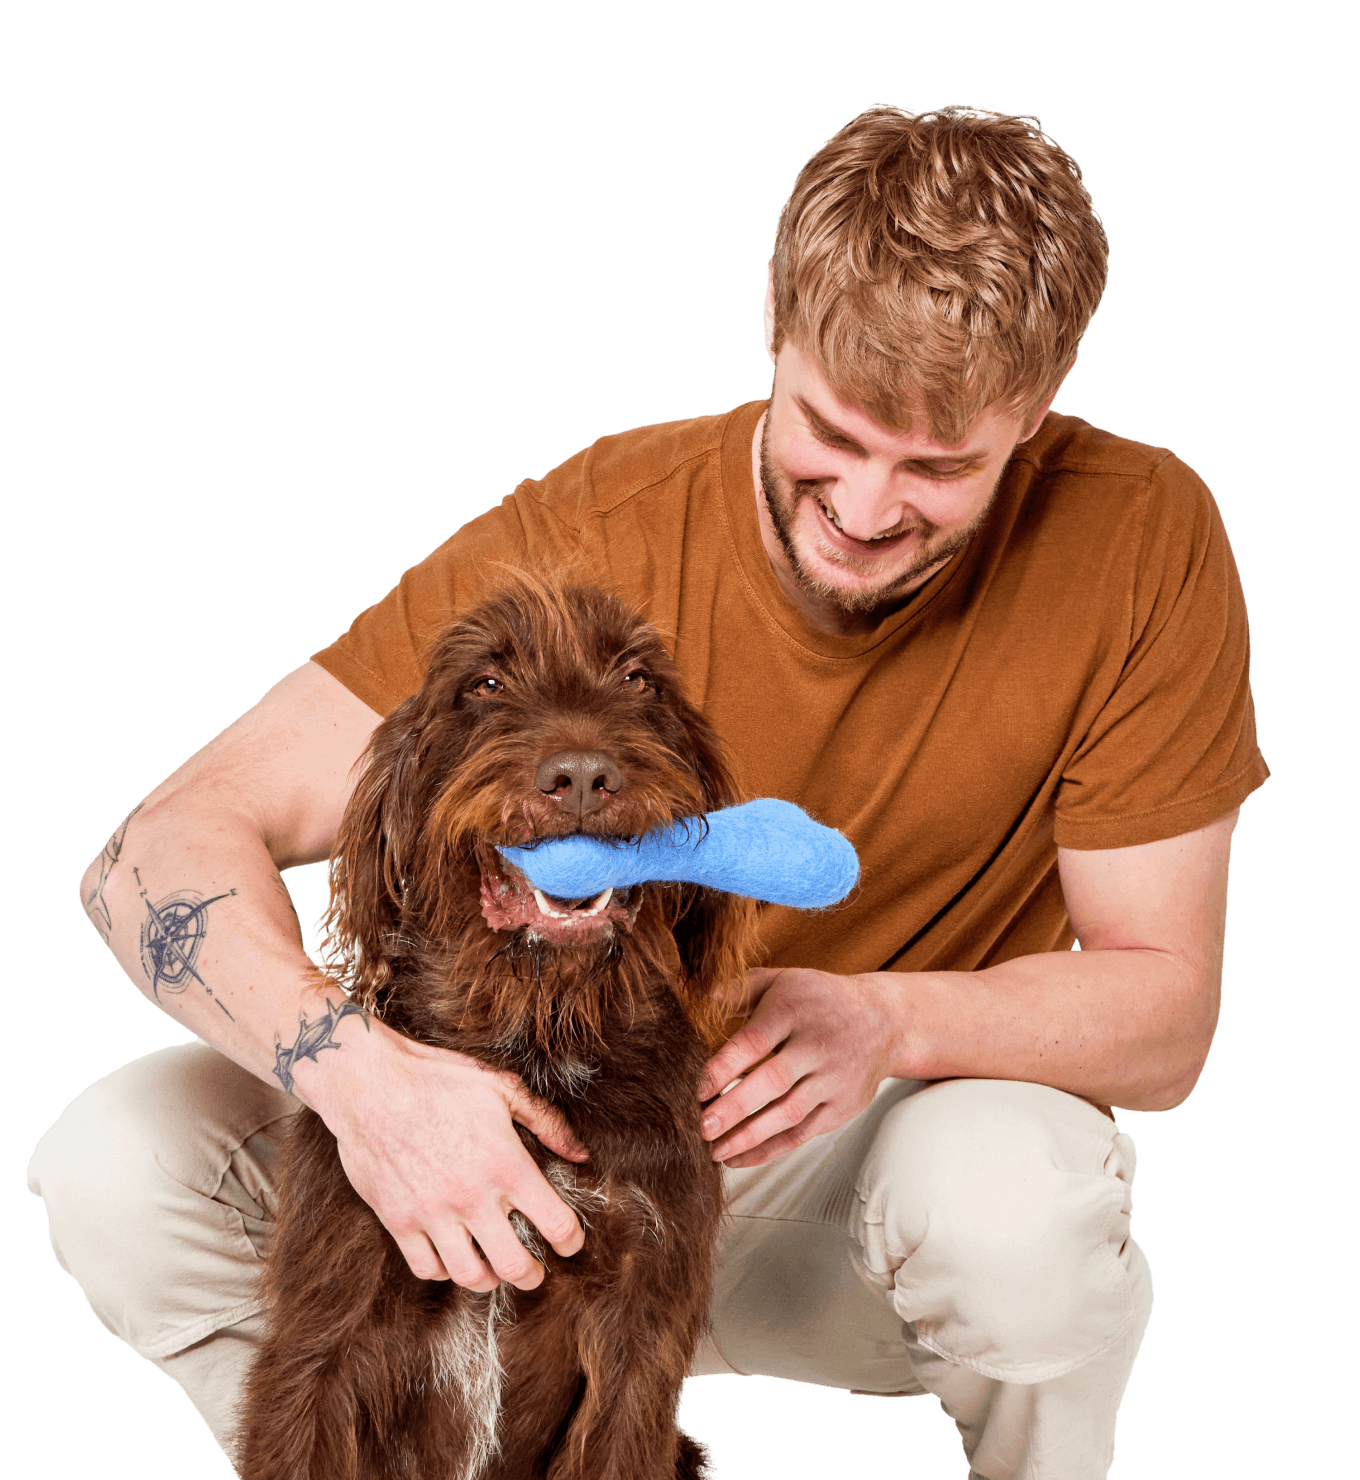 A man bending down to pet his brown, scruffy dog.